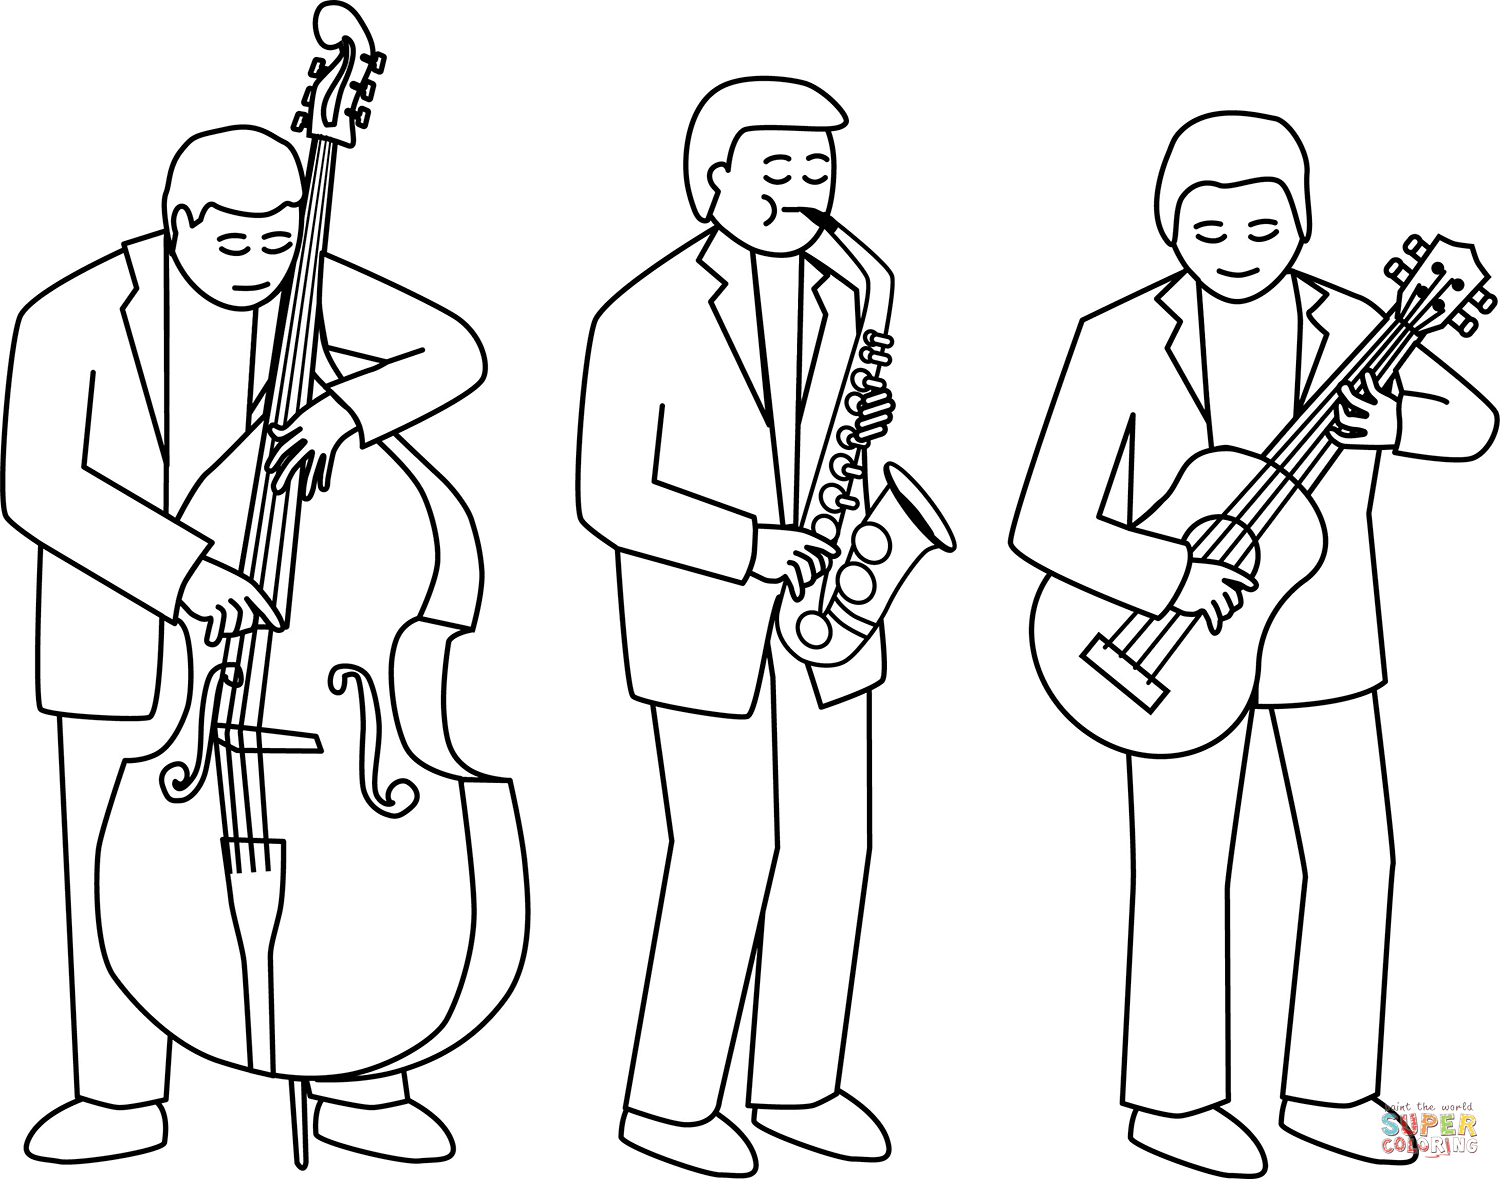 Jazz Musicians coloring page | Free Printable Coloring Pages